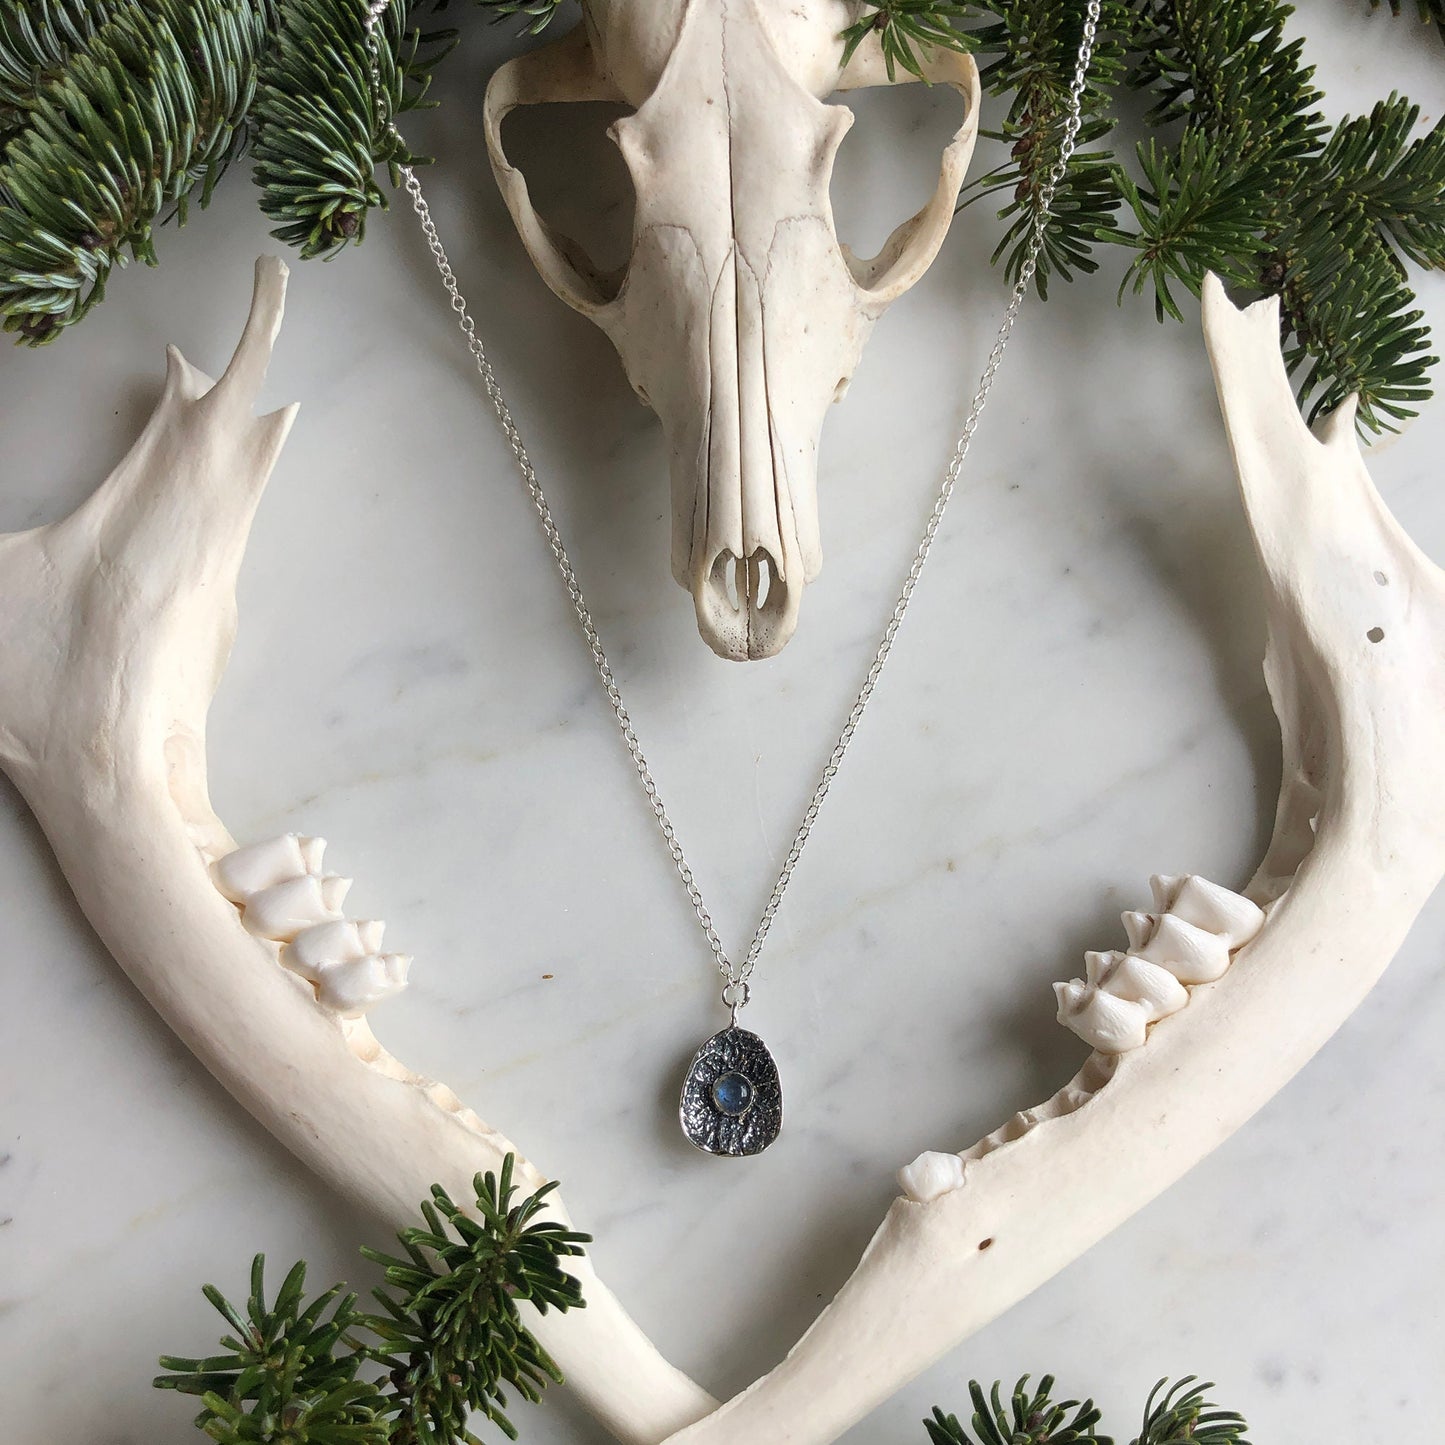 deer vertebral epiphysis necklace (3/4" cupped) with Labradorite